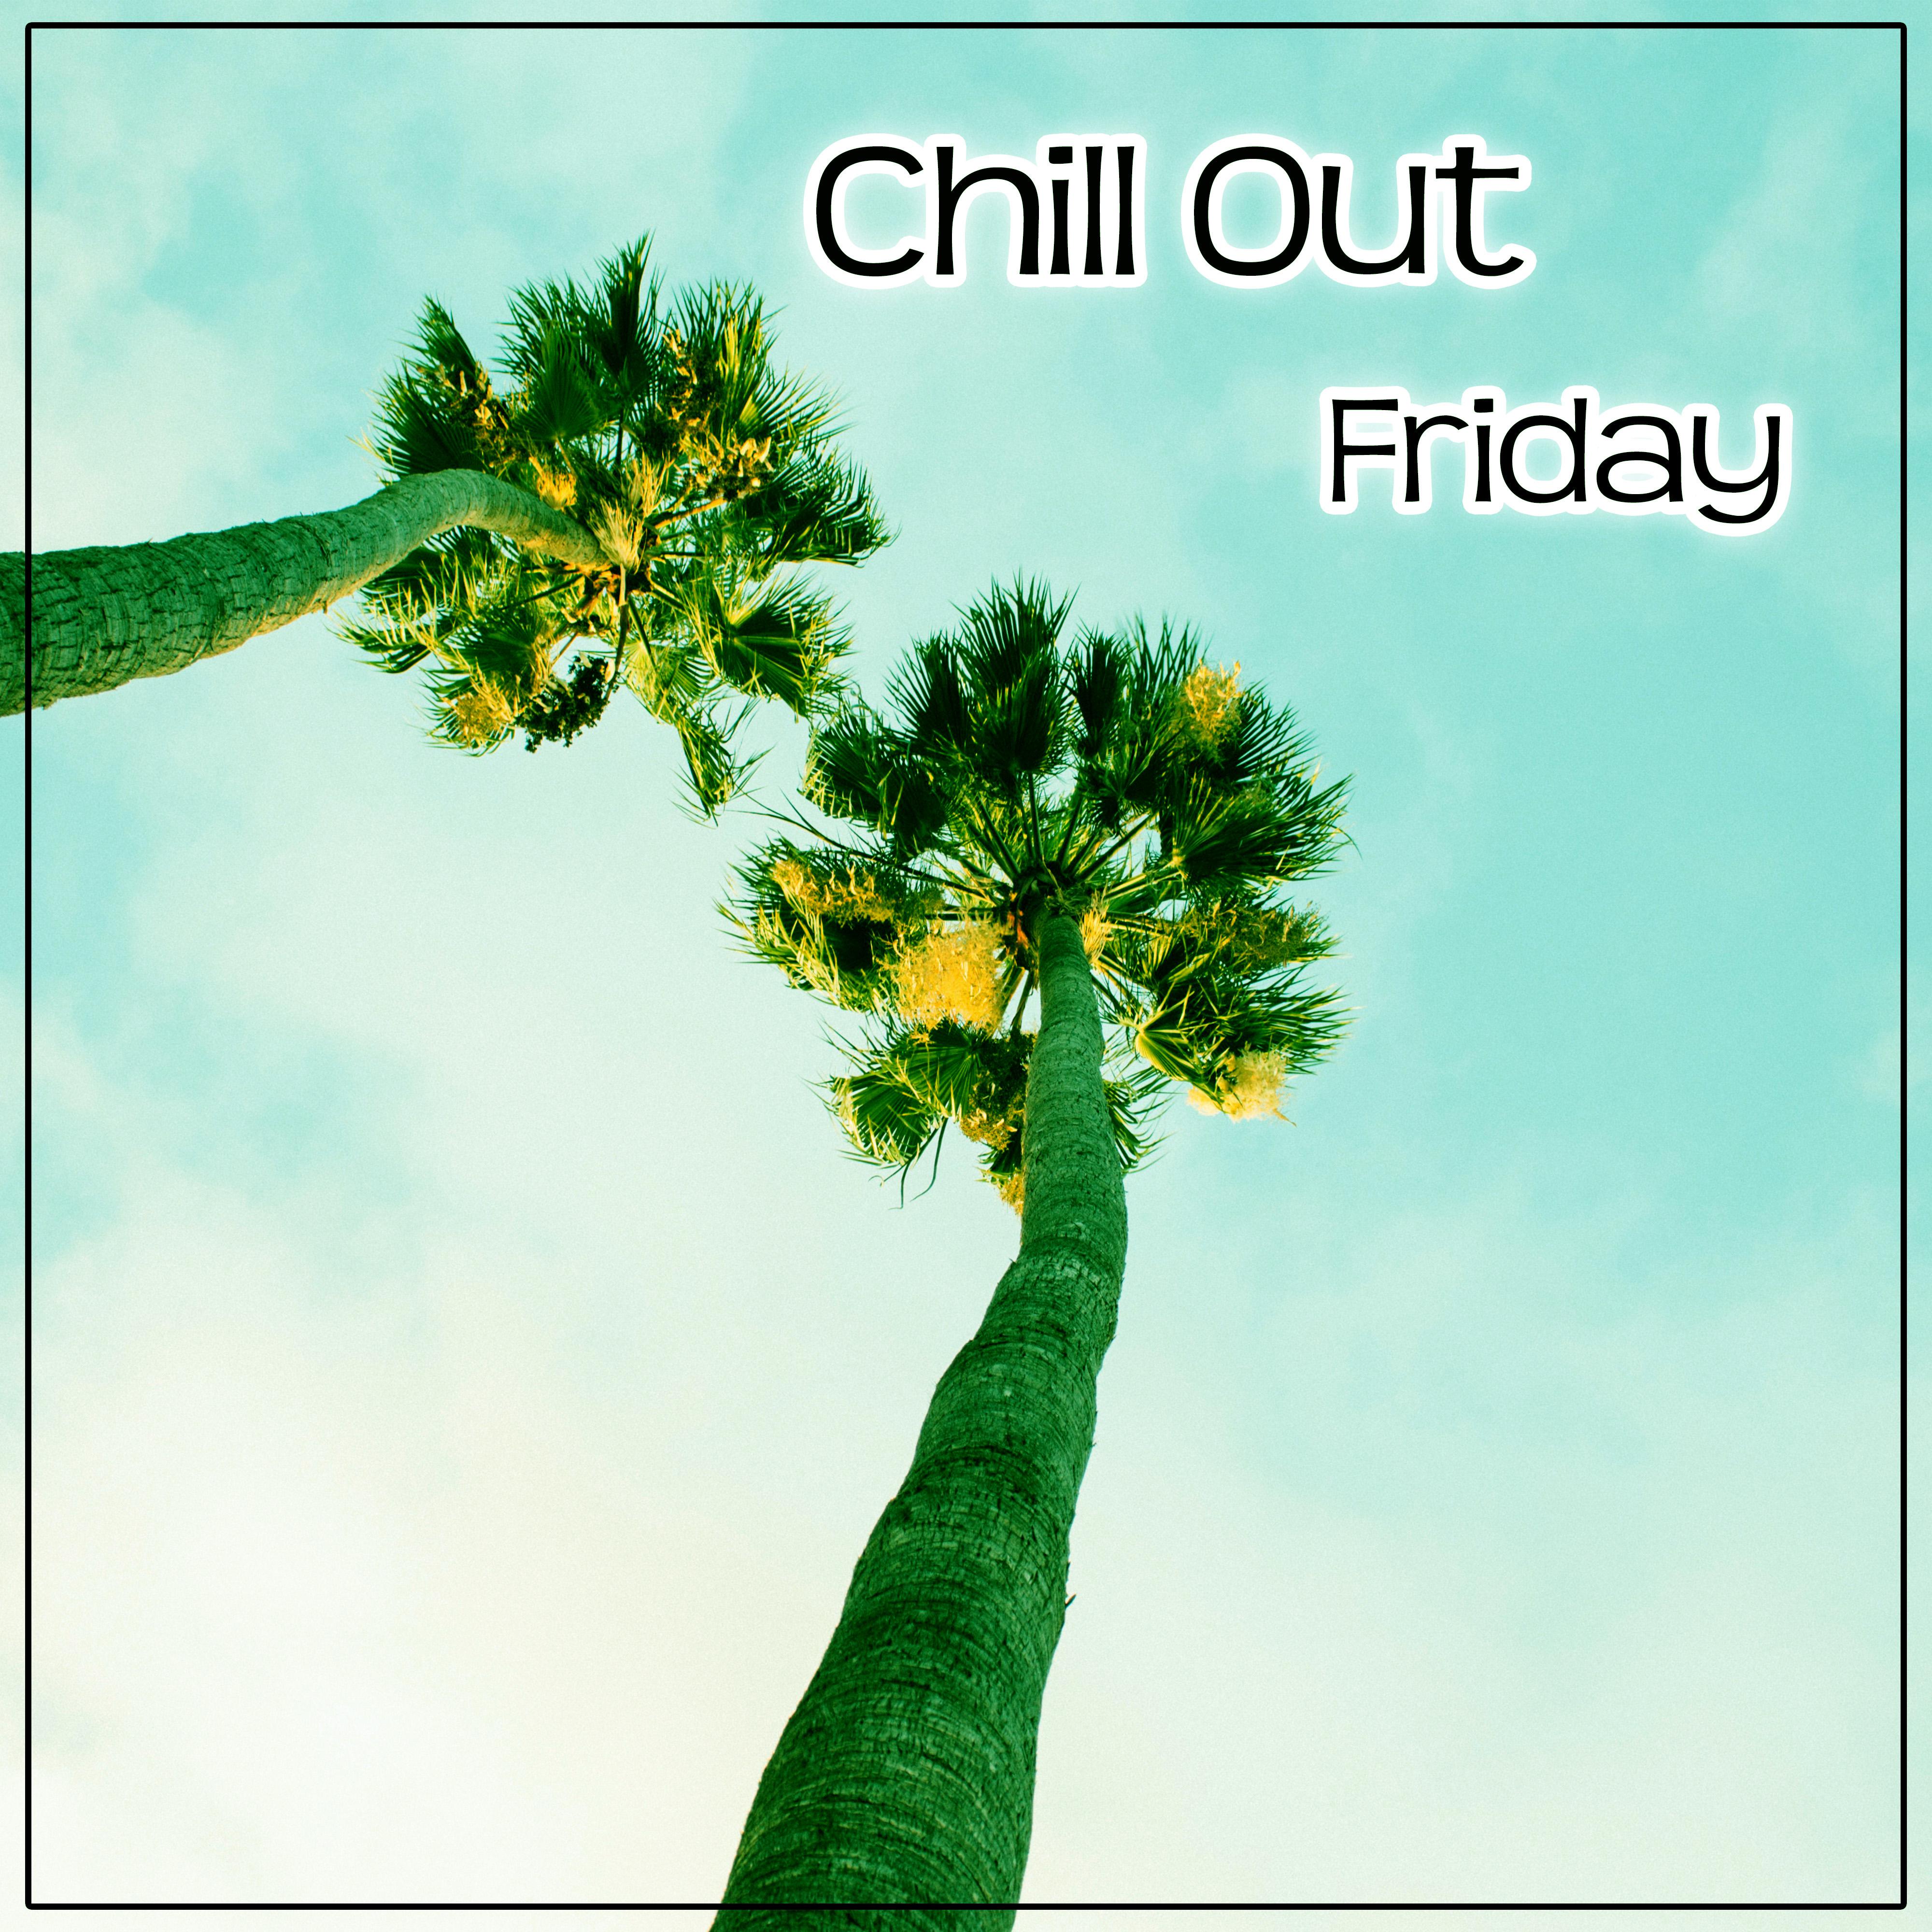 Chill Out Friday - The Best Chillout for Party Dance, Summer Chill, Relax Under Umbrella, Beach Party, Holidays Music, Summer Solstice